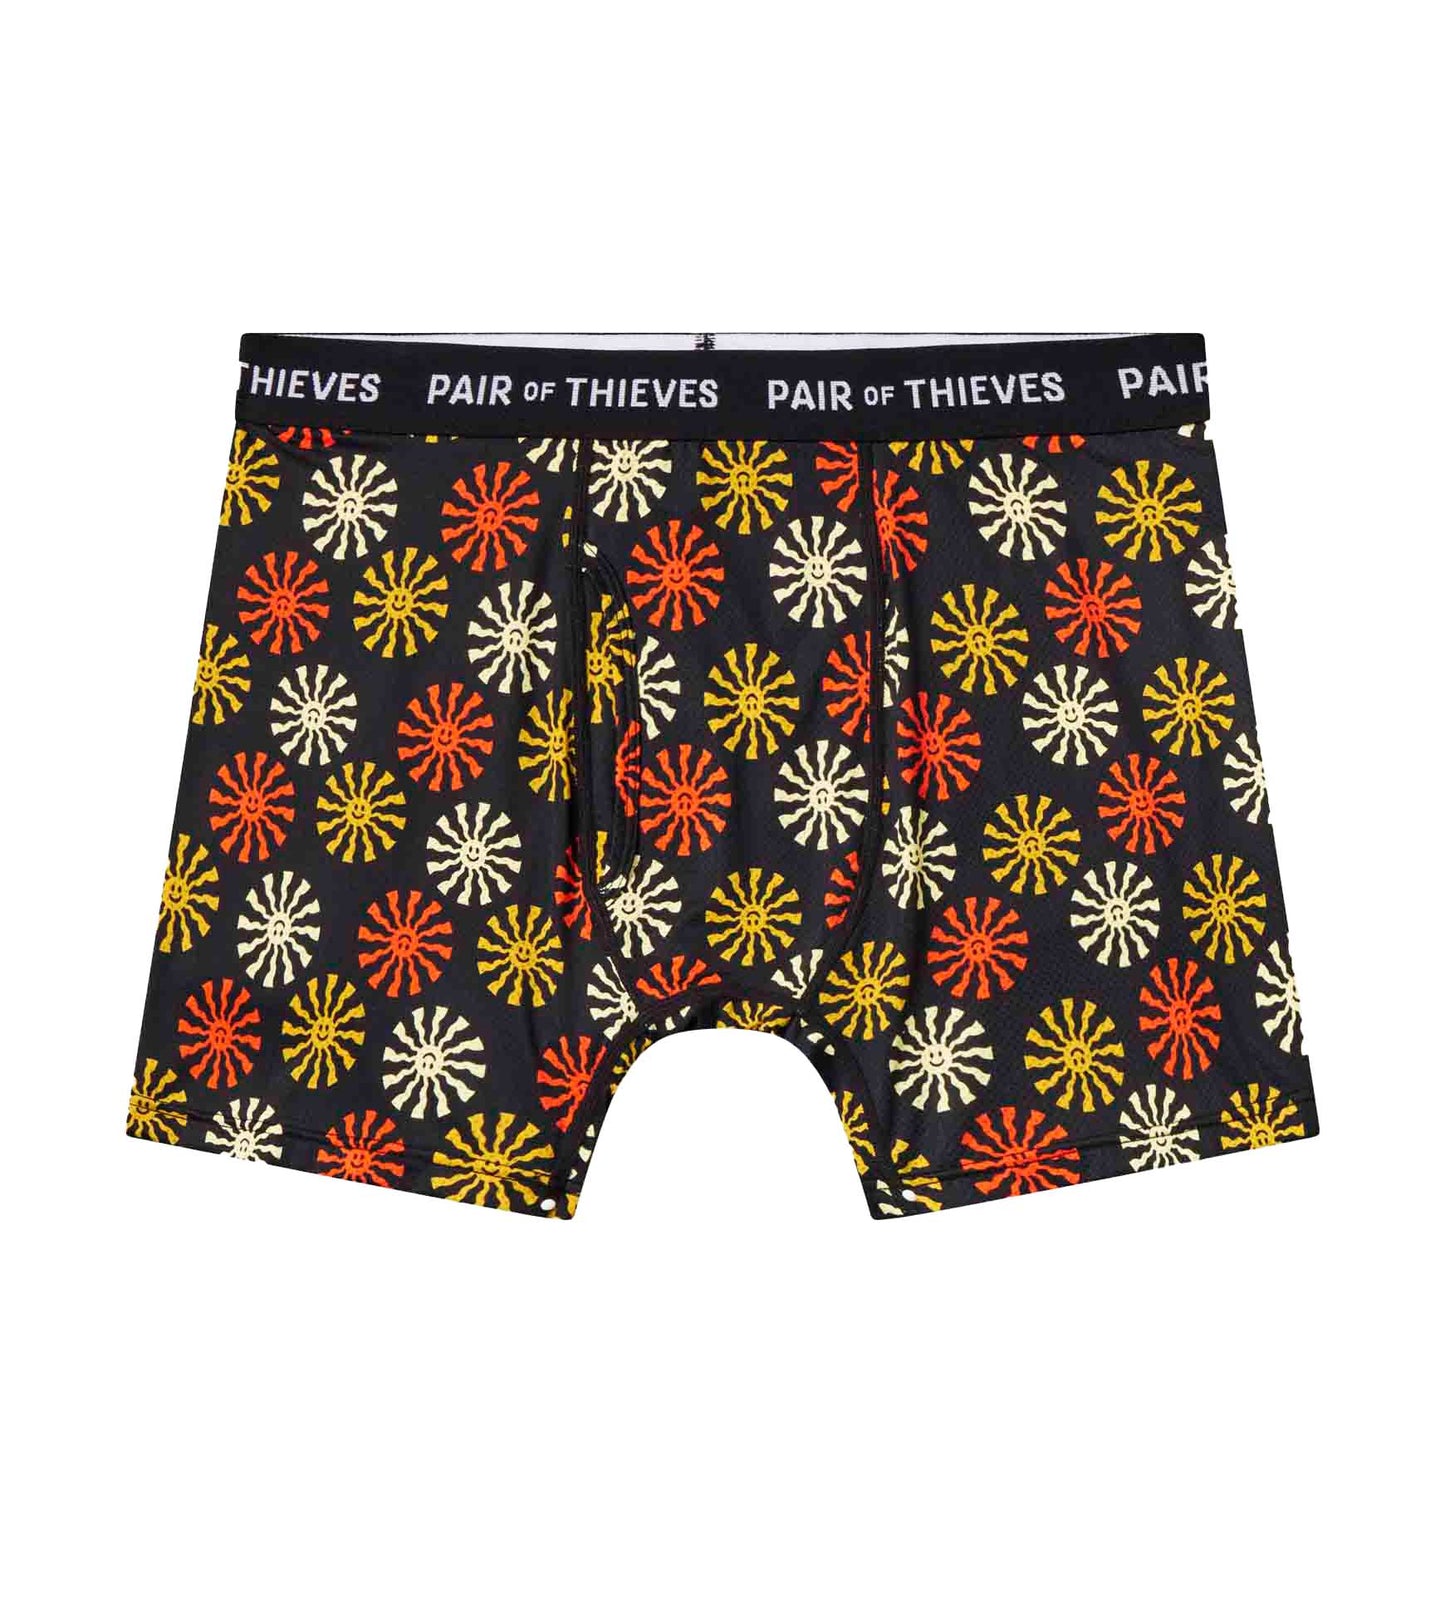 Pair of Thieves SuperFit Boxer Briefs - $3.88 Riverpoint Pkwy